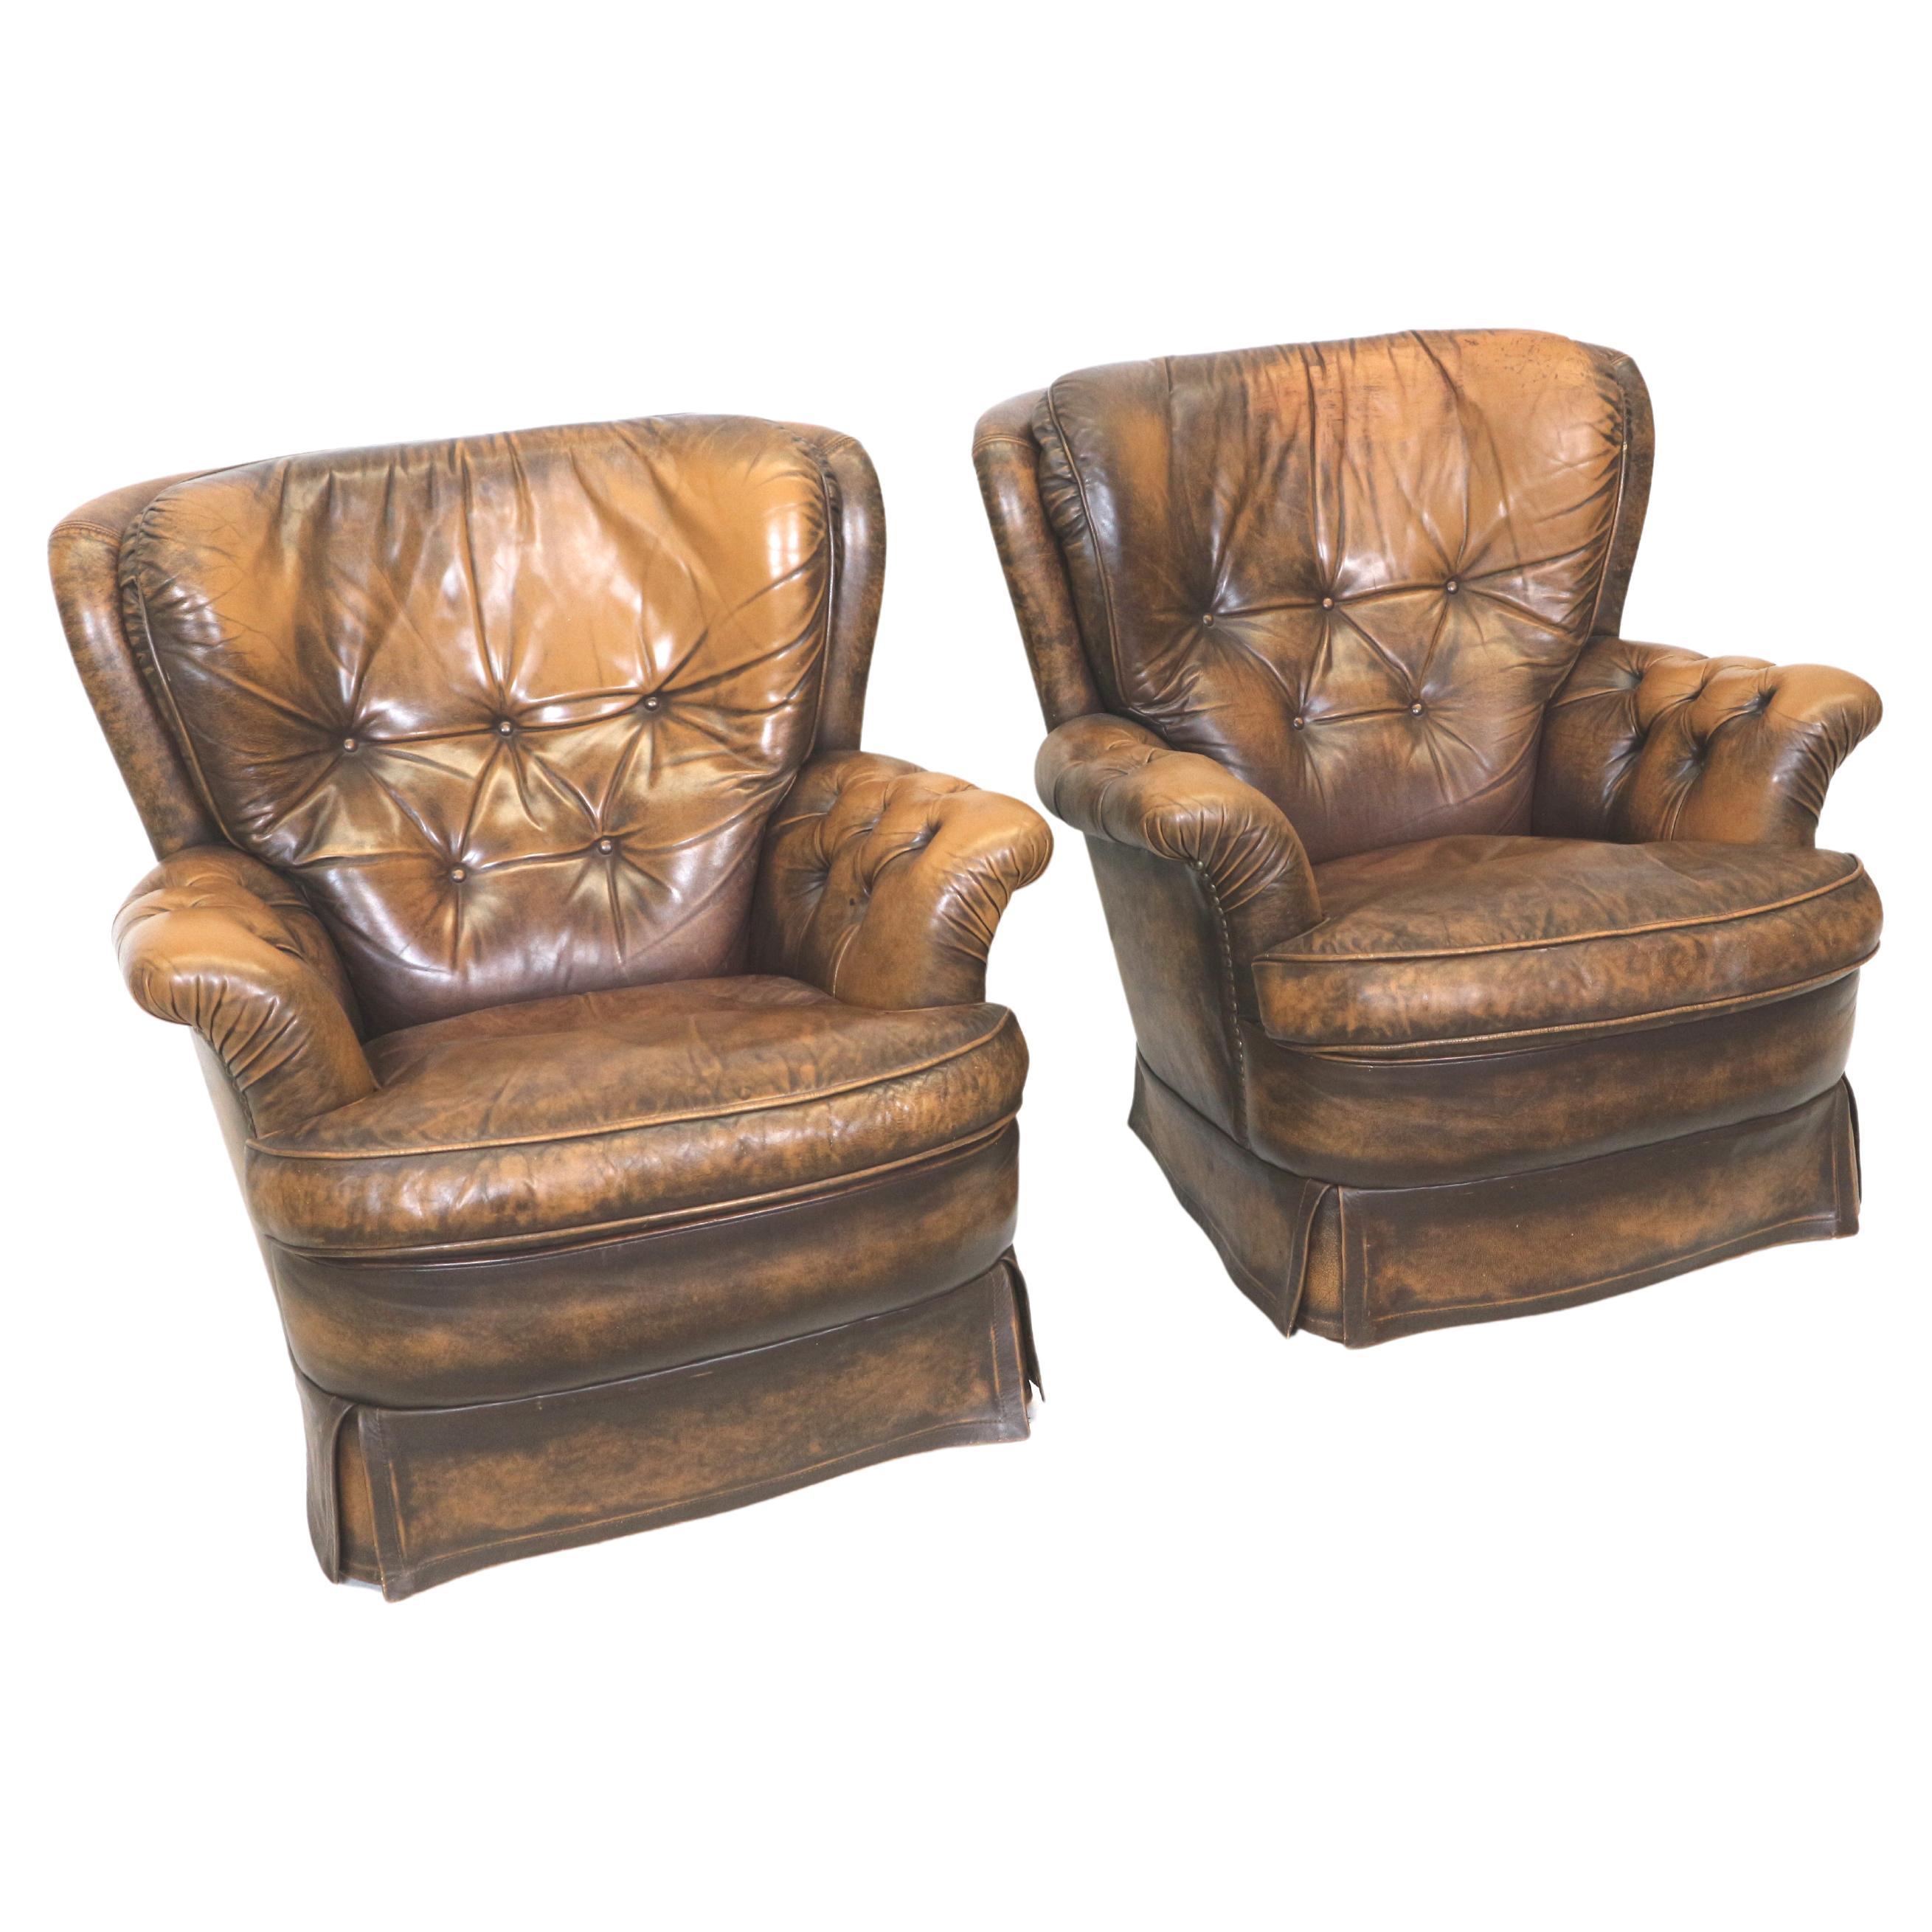 Set of 2 leather Chesterfield armchairs from the 1970s